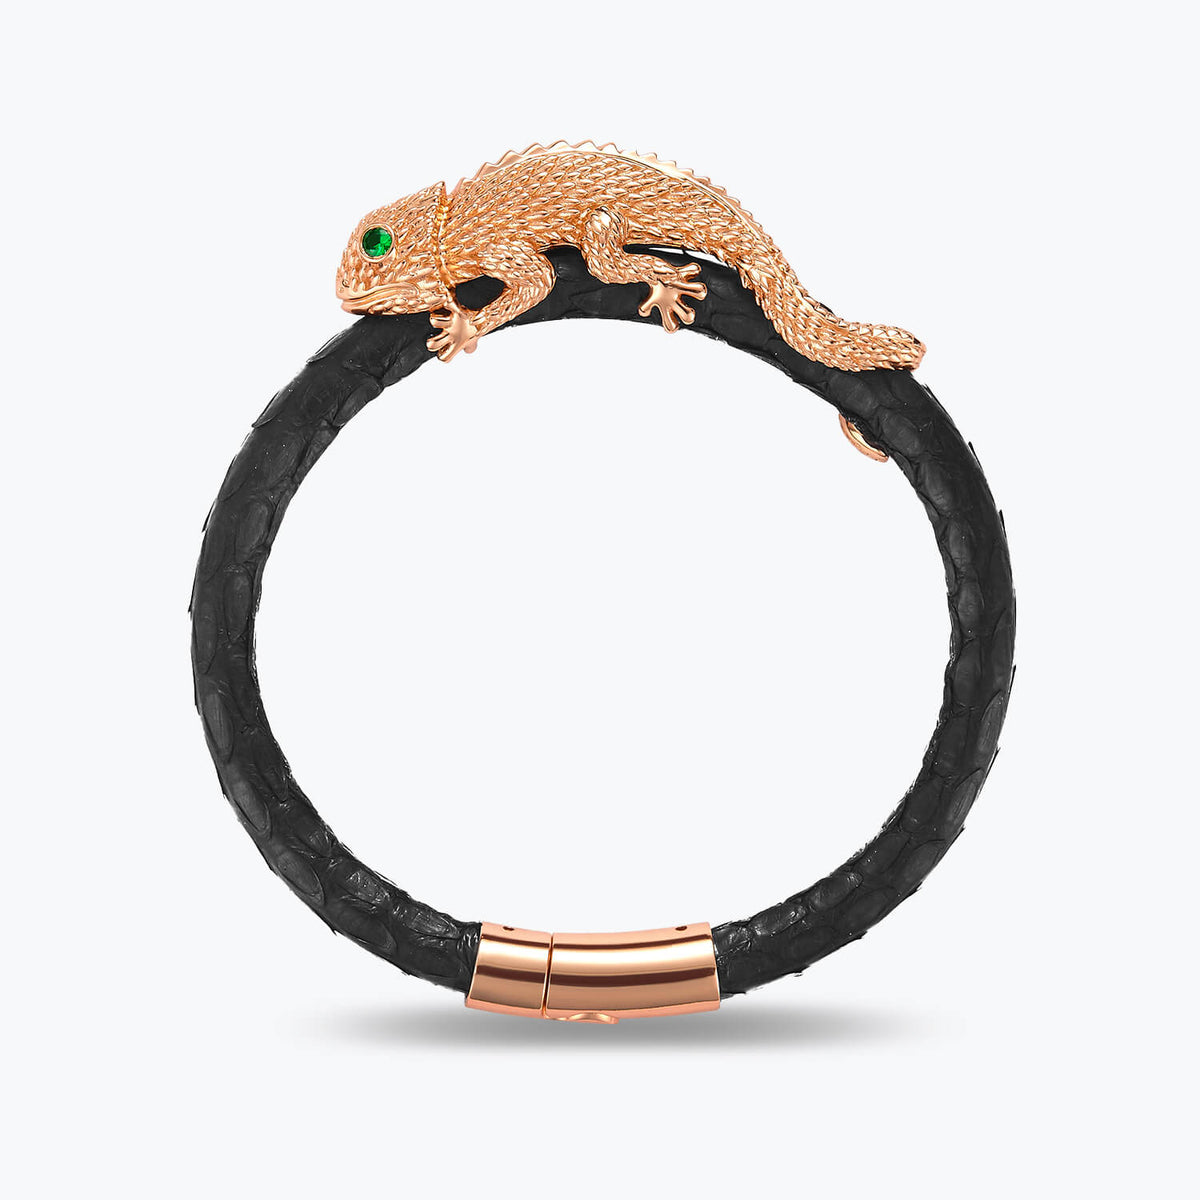 Dissoo®  Genuine Leather With Sterling Silver Lizard Bracelet